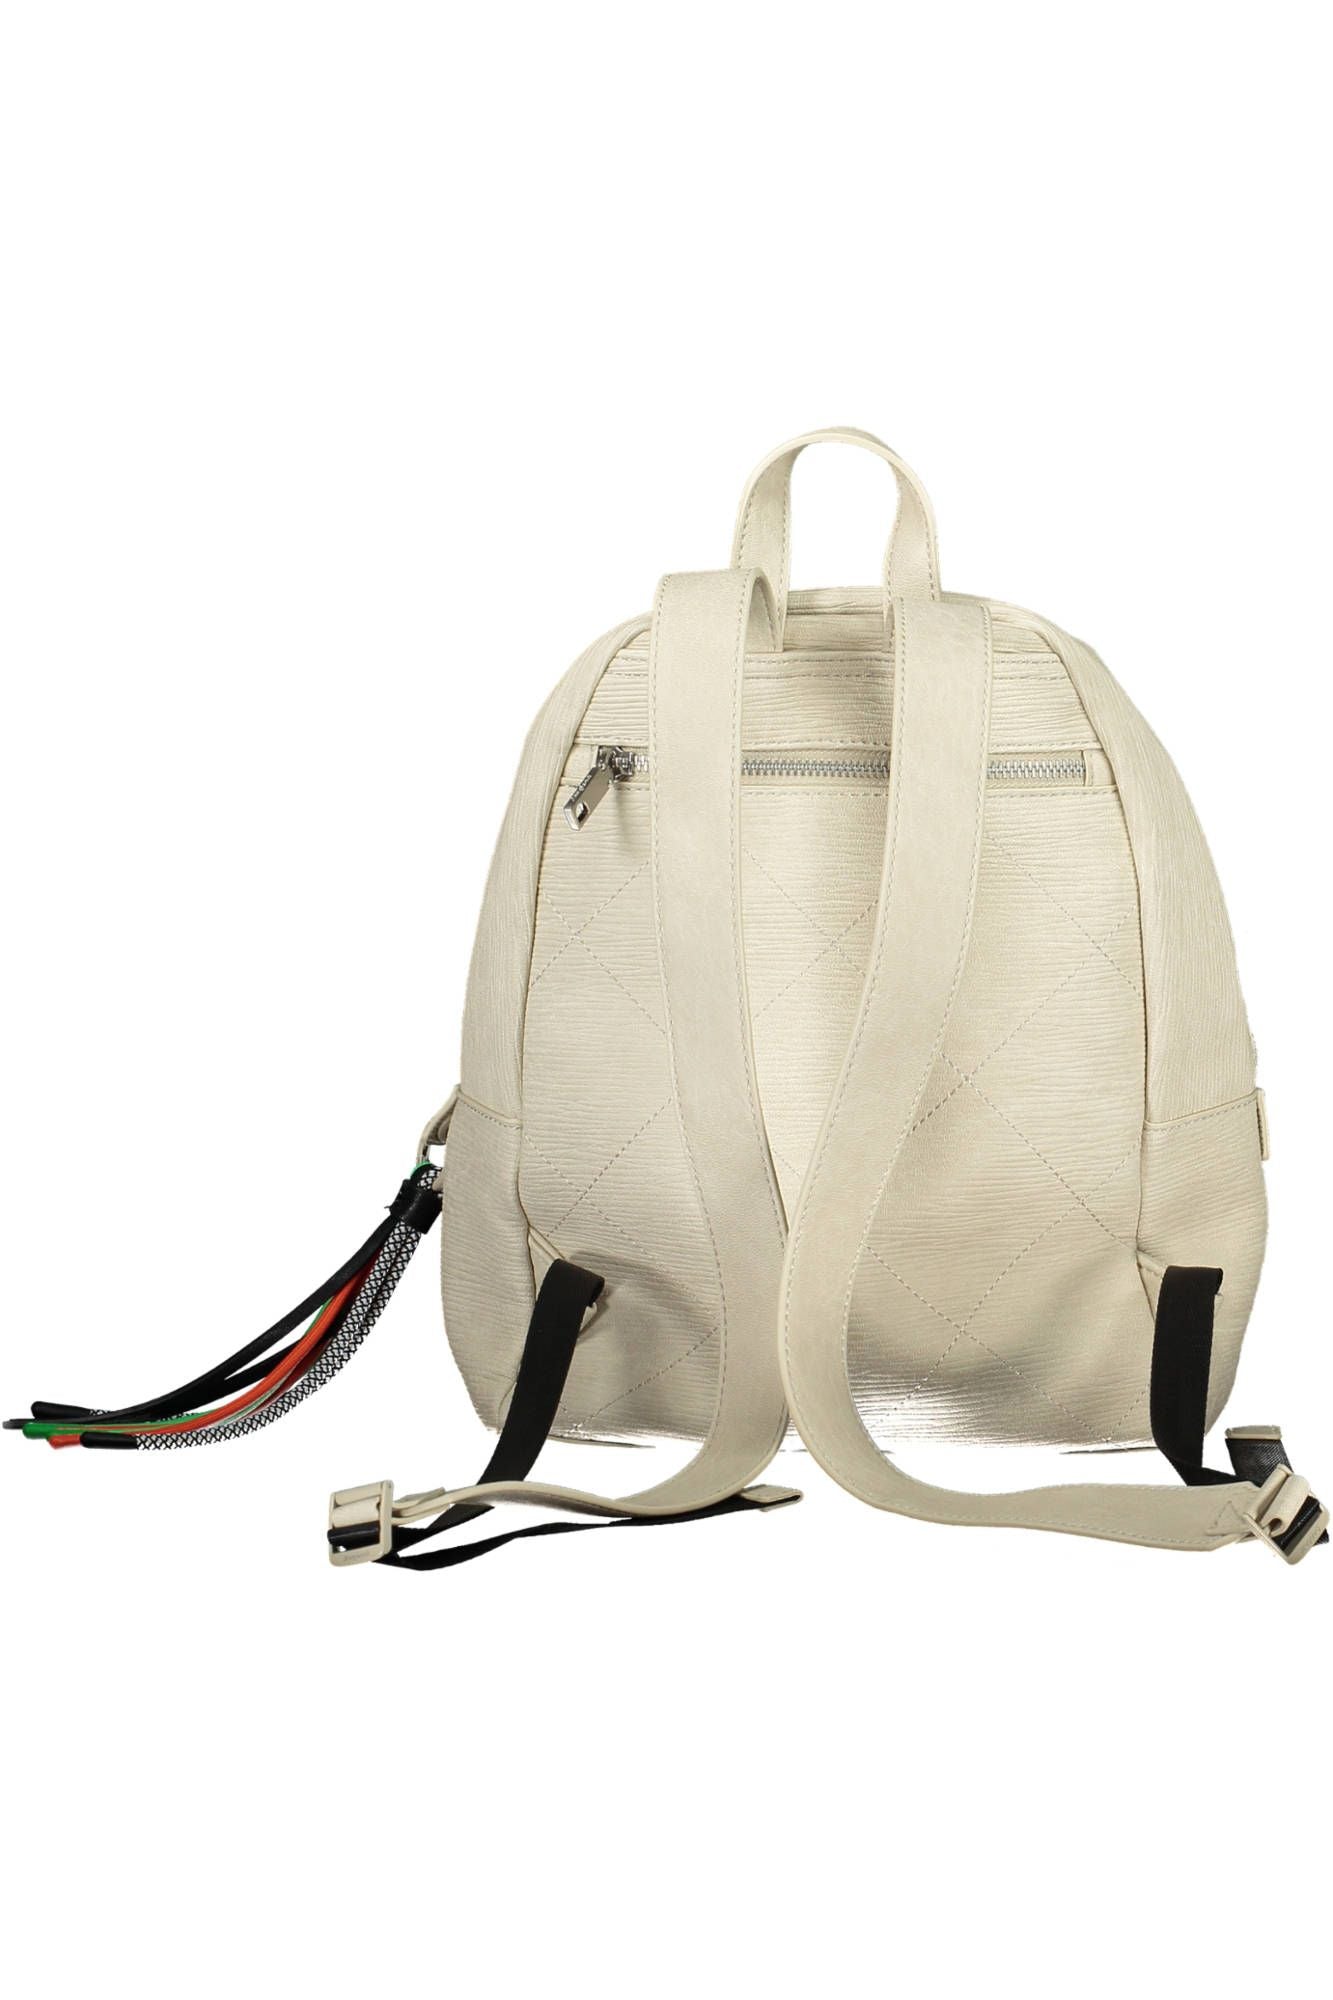 Elegant White Backpack with Contrasting Details